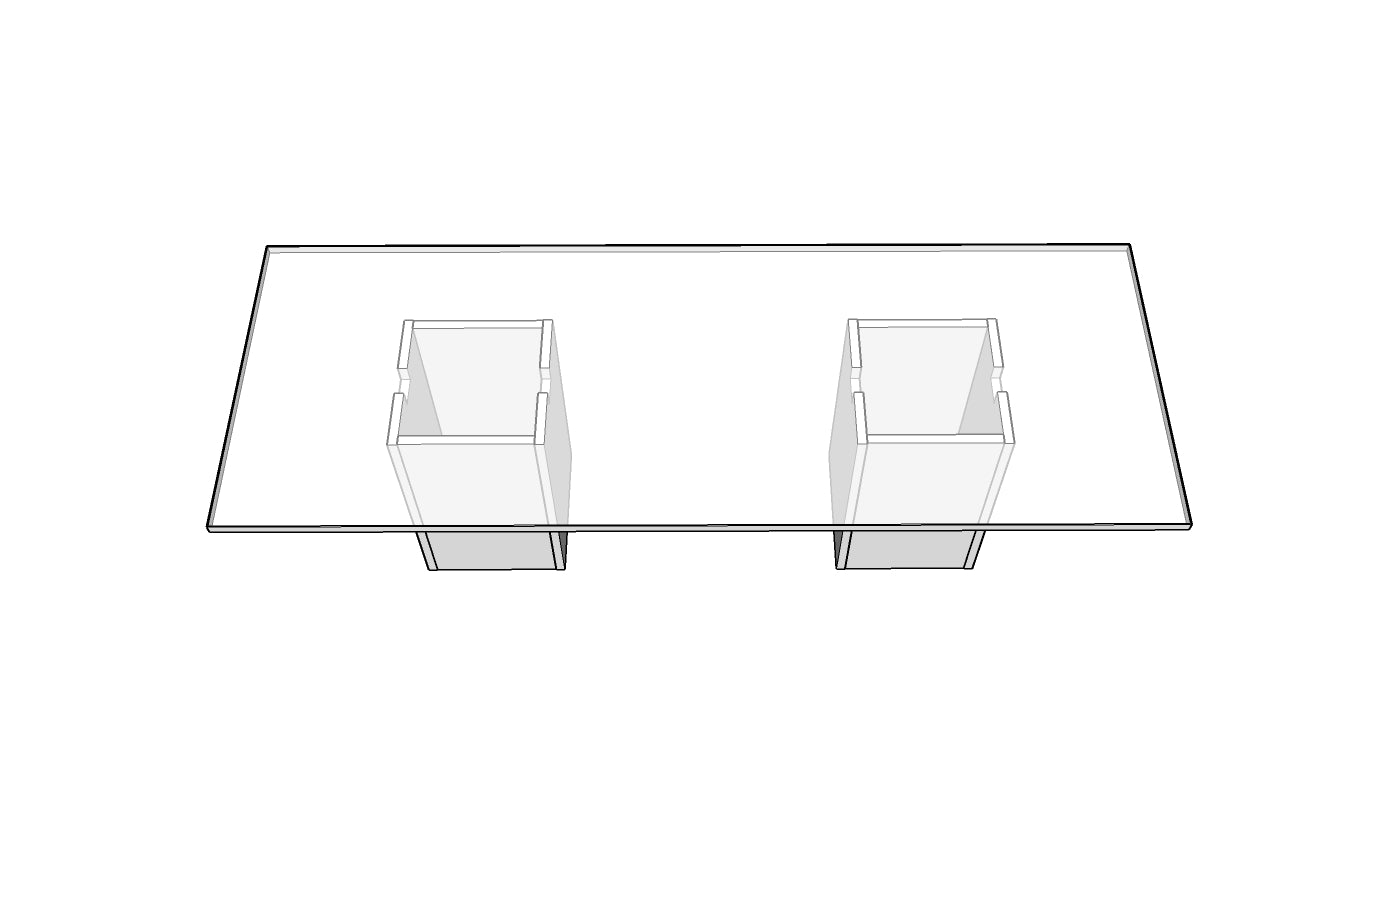 Treo Rectangular Conference Table with Cube Base